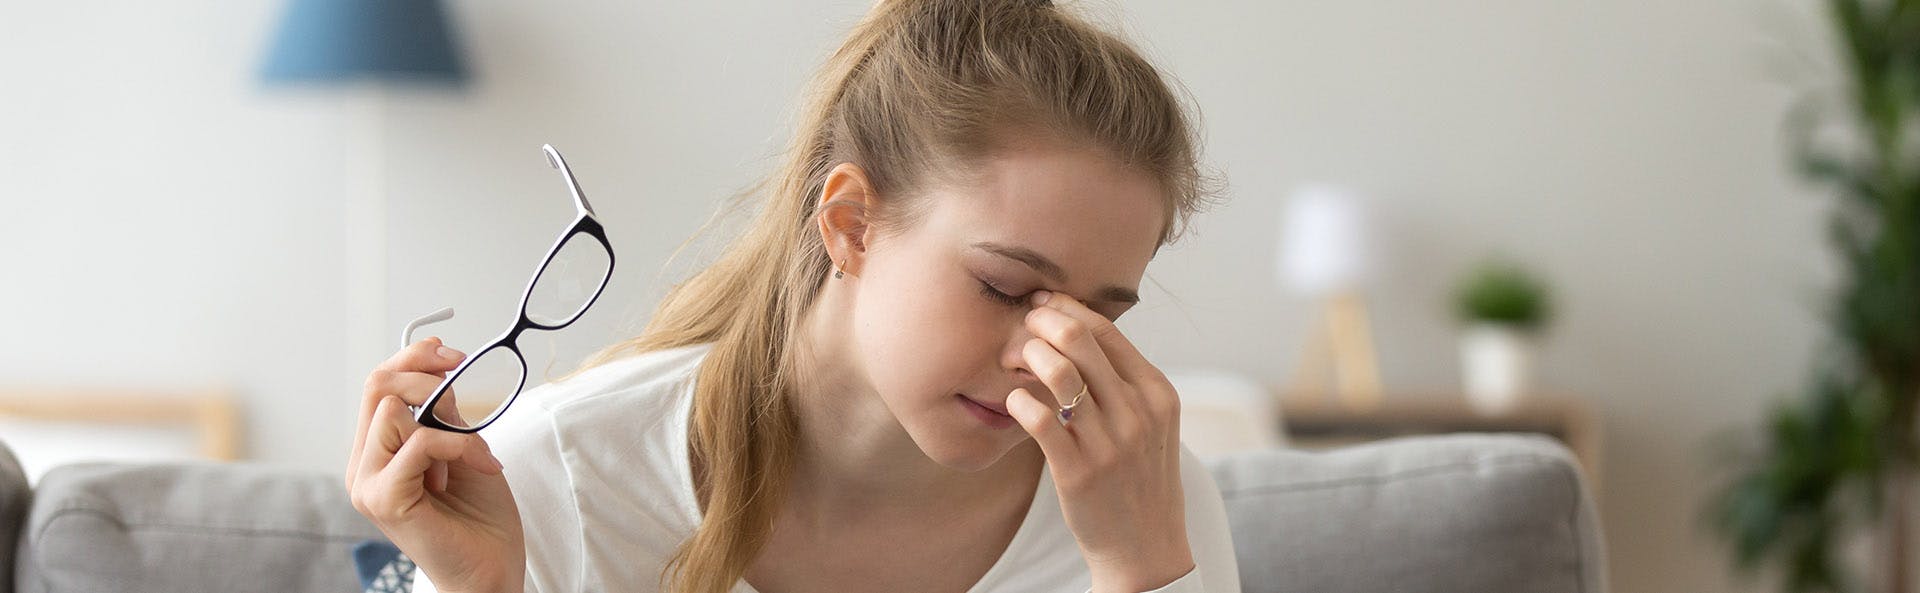 The Causes And Treatment Of Sinus Pain Panadol Au